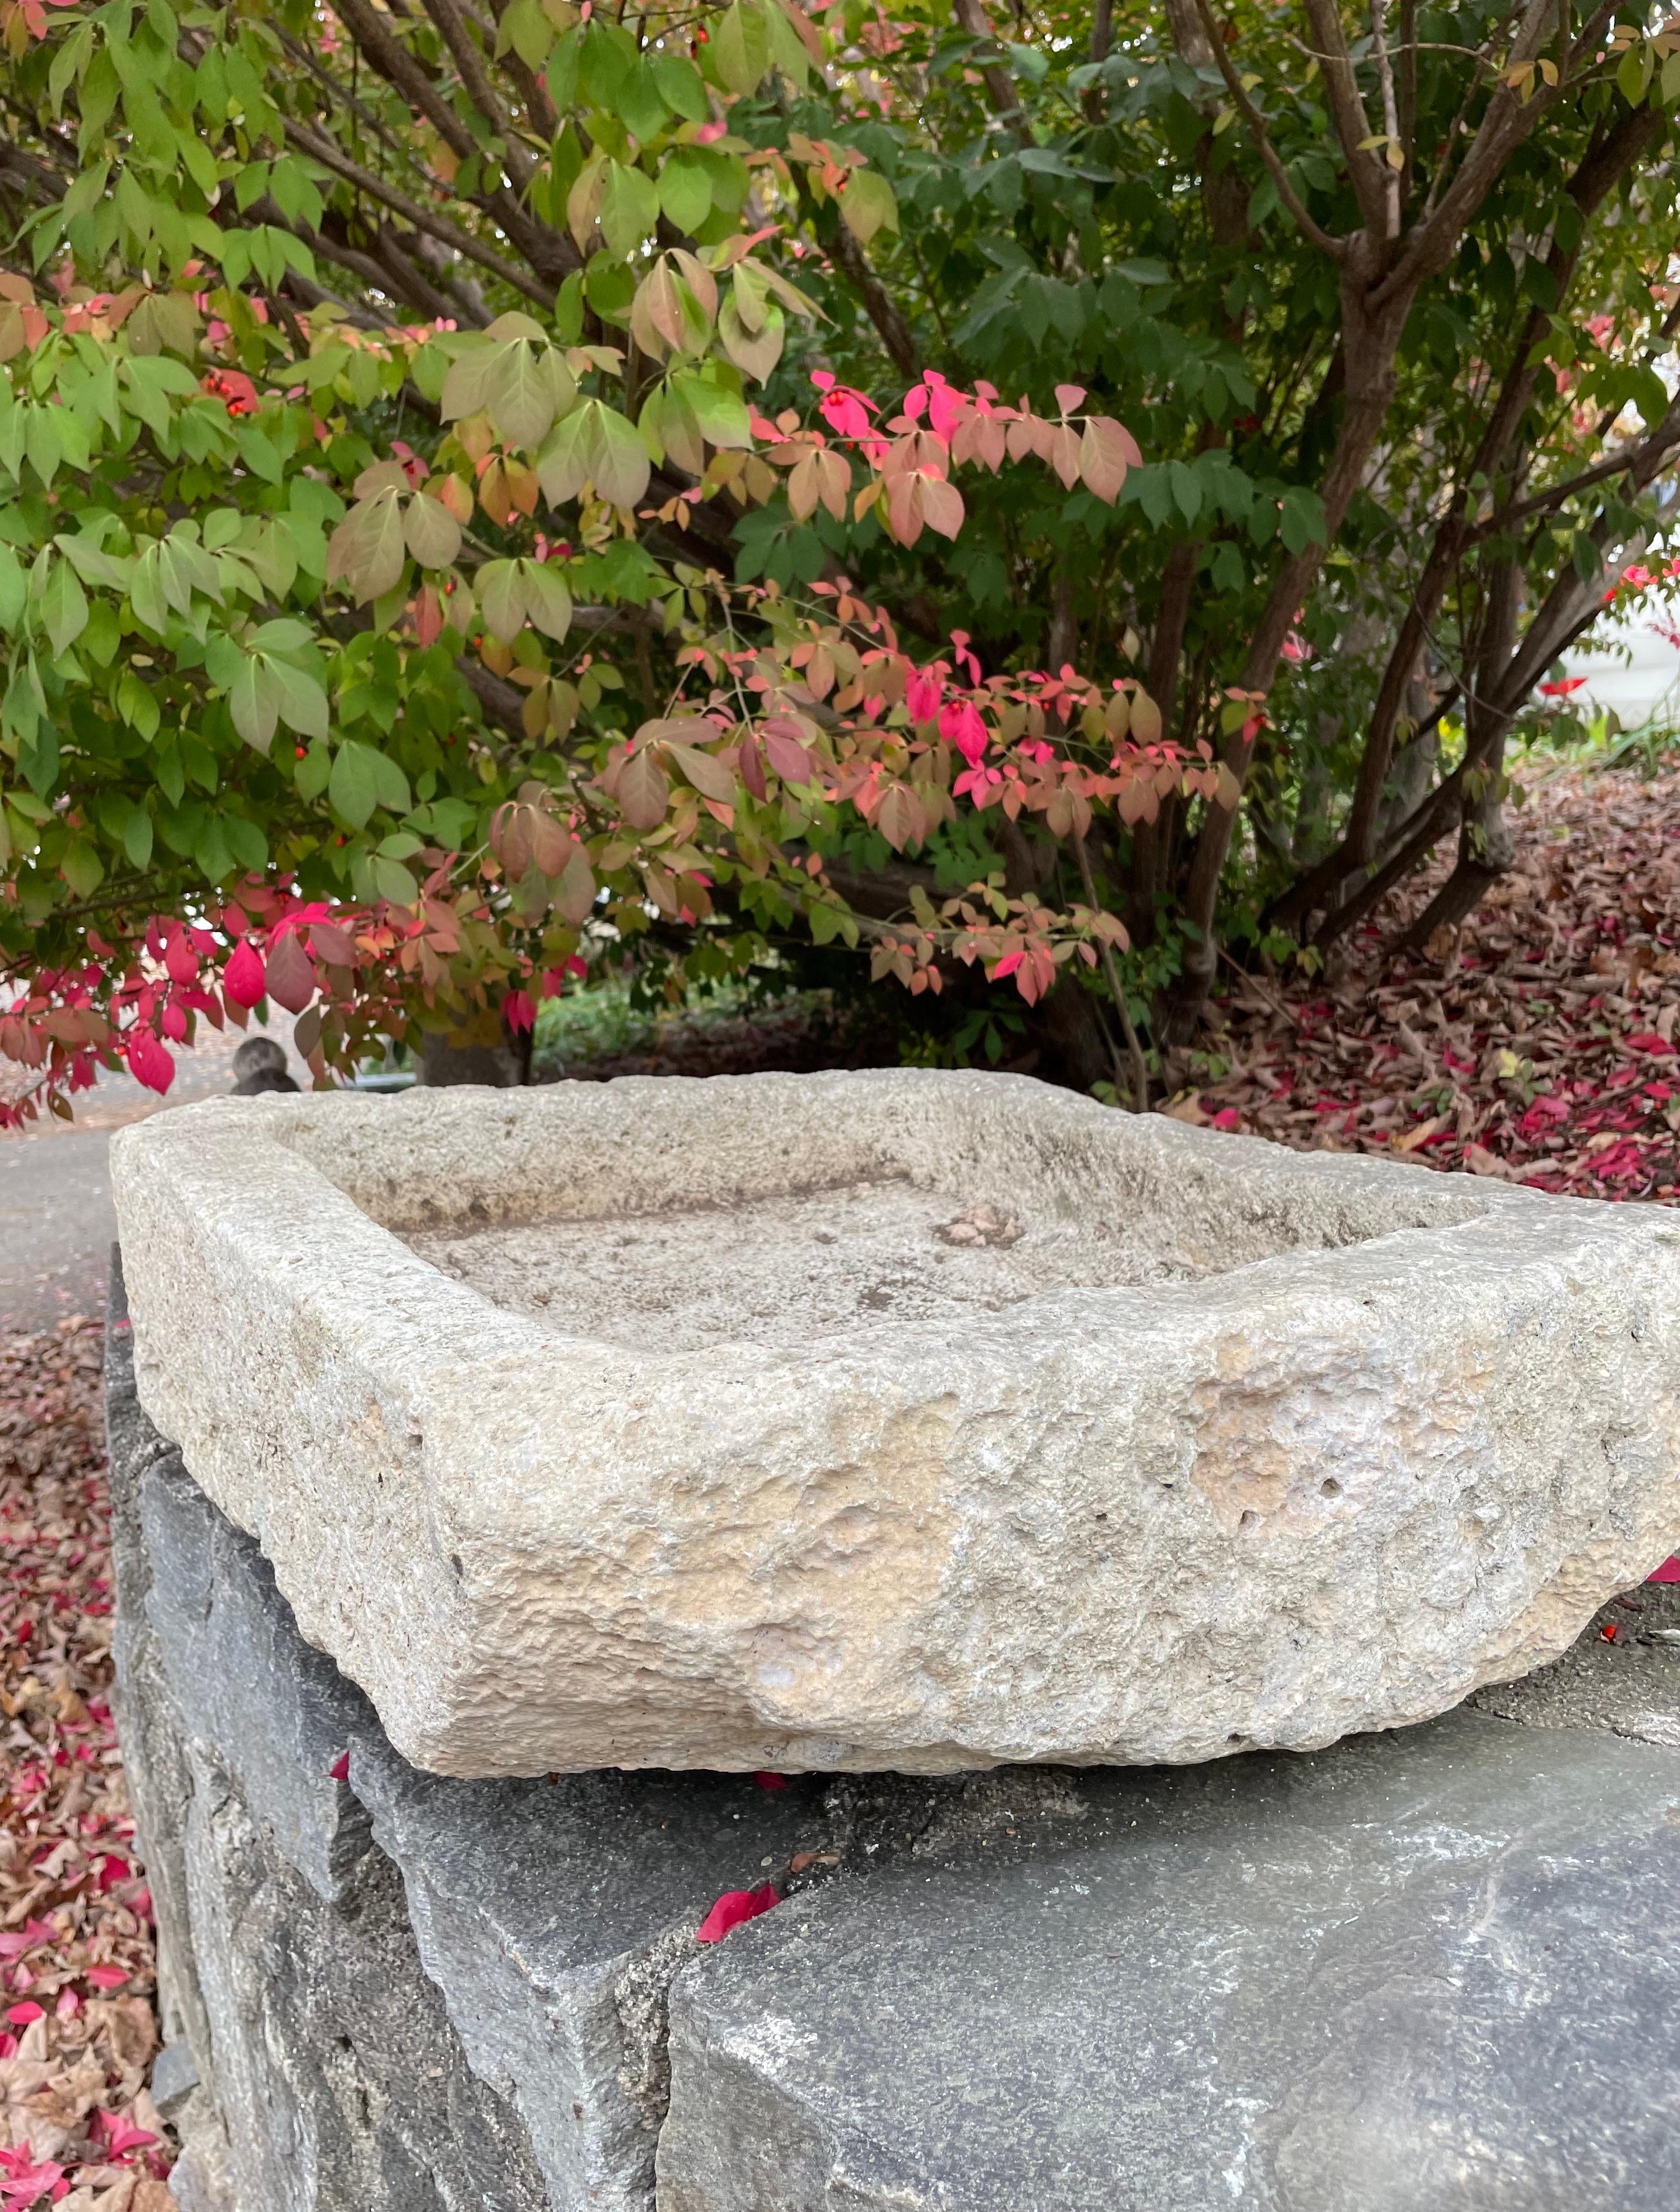 We choose our French limestone troughs for their beautiful patinas and versatility as water features or planters. This beauty was hand-carved from limestone and features a lightly-weathered patina. Beautiful as a sink (indoors or out) or as a